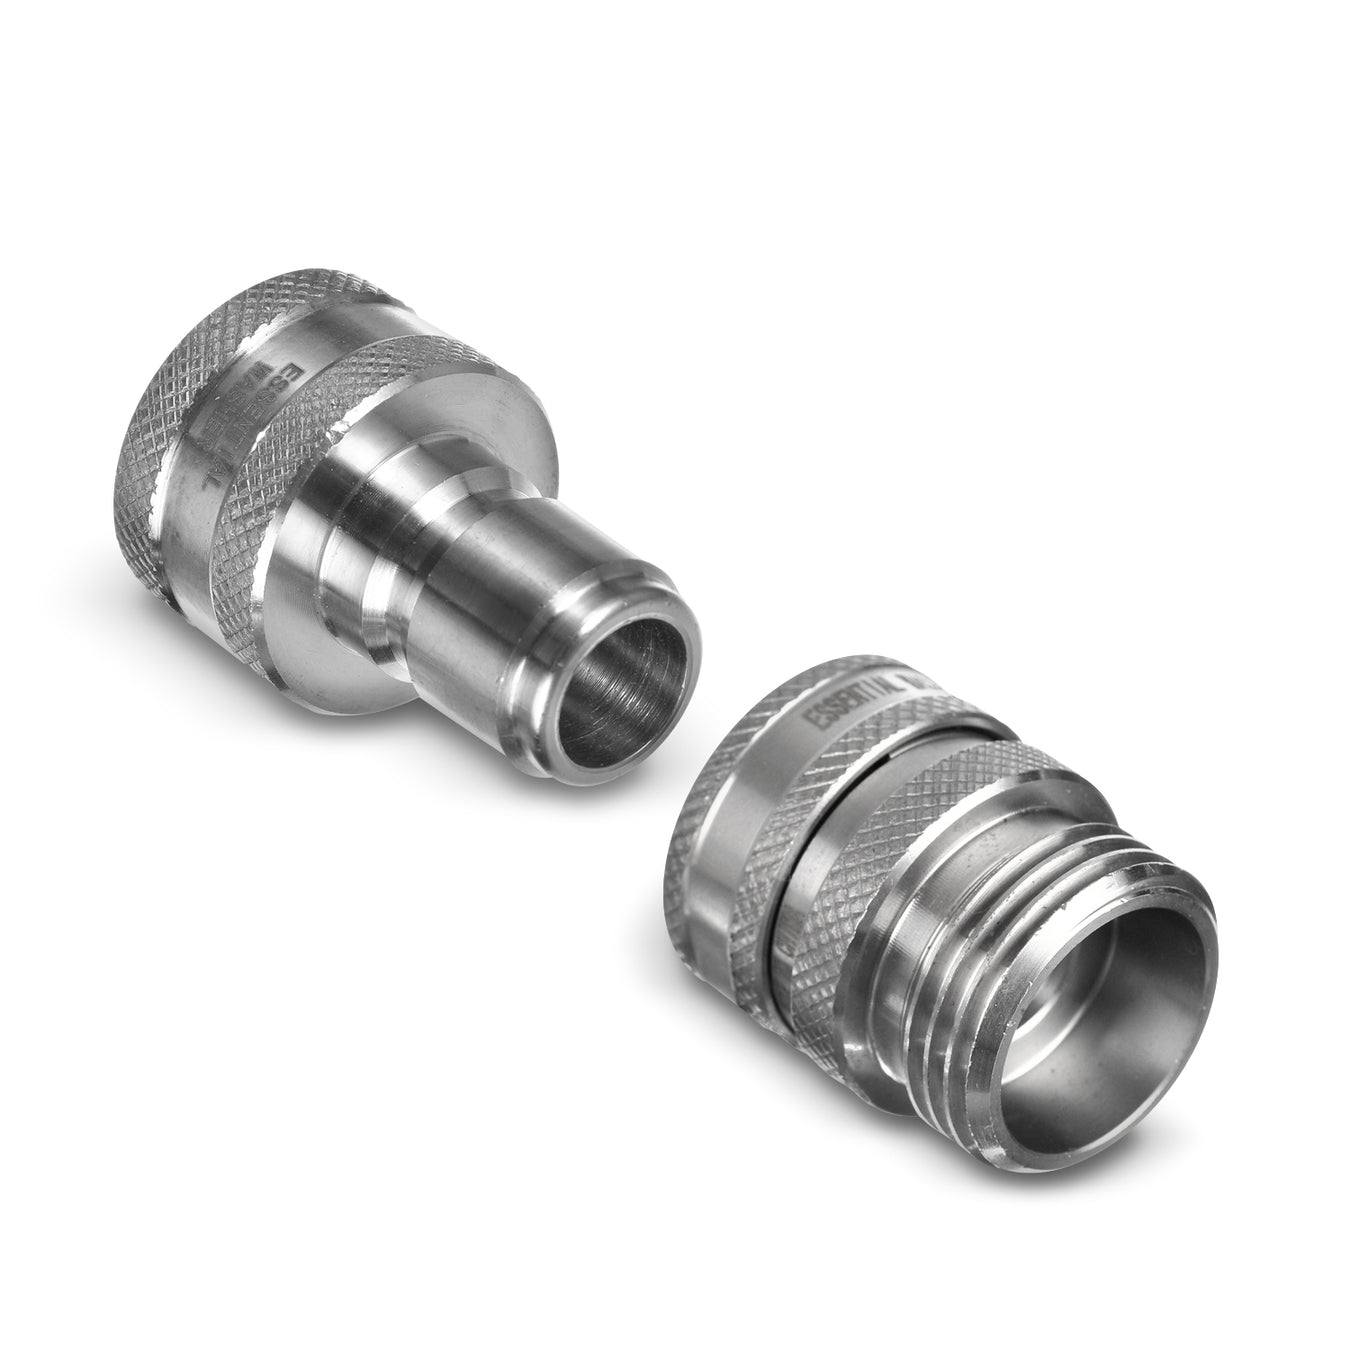 Stainless Steel Pressure Washer Fittings